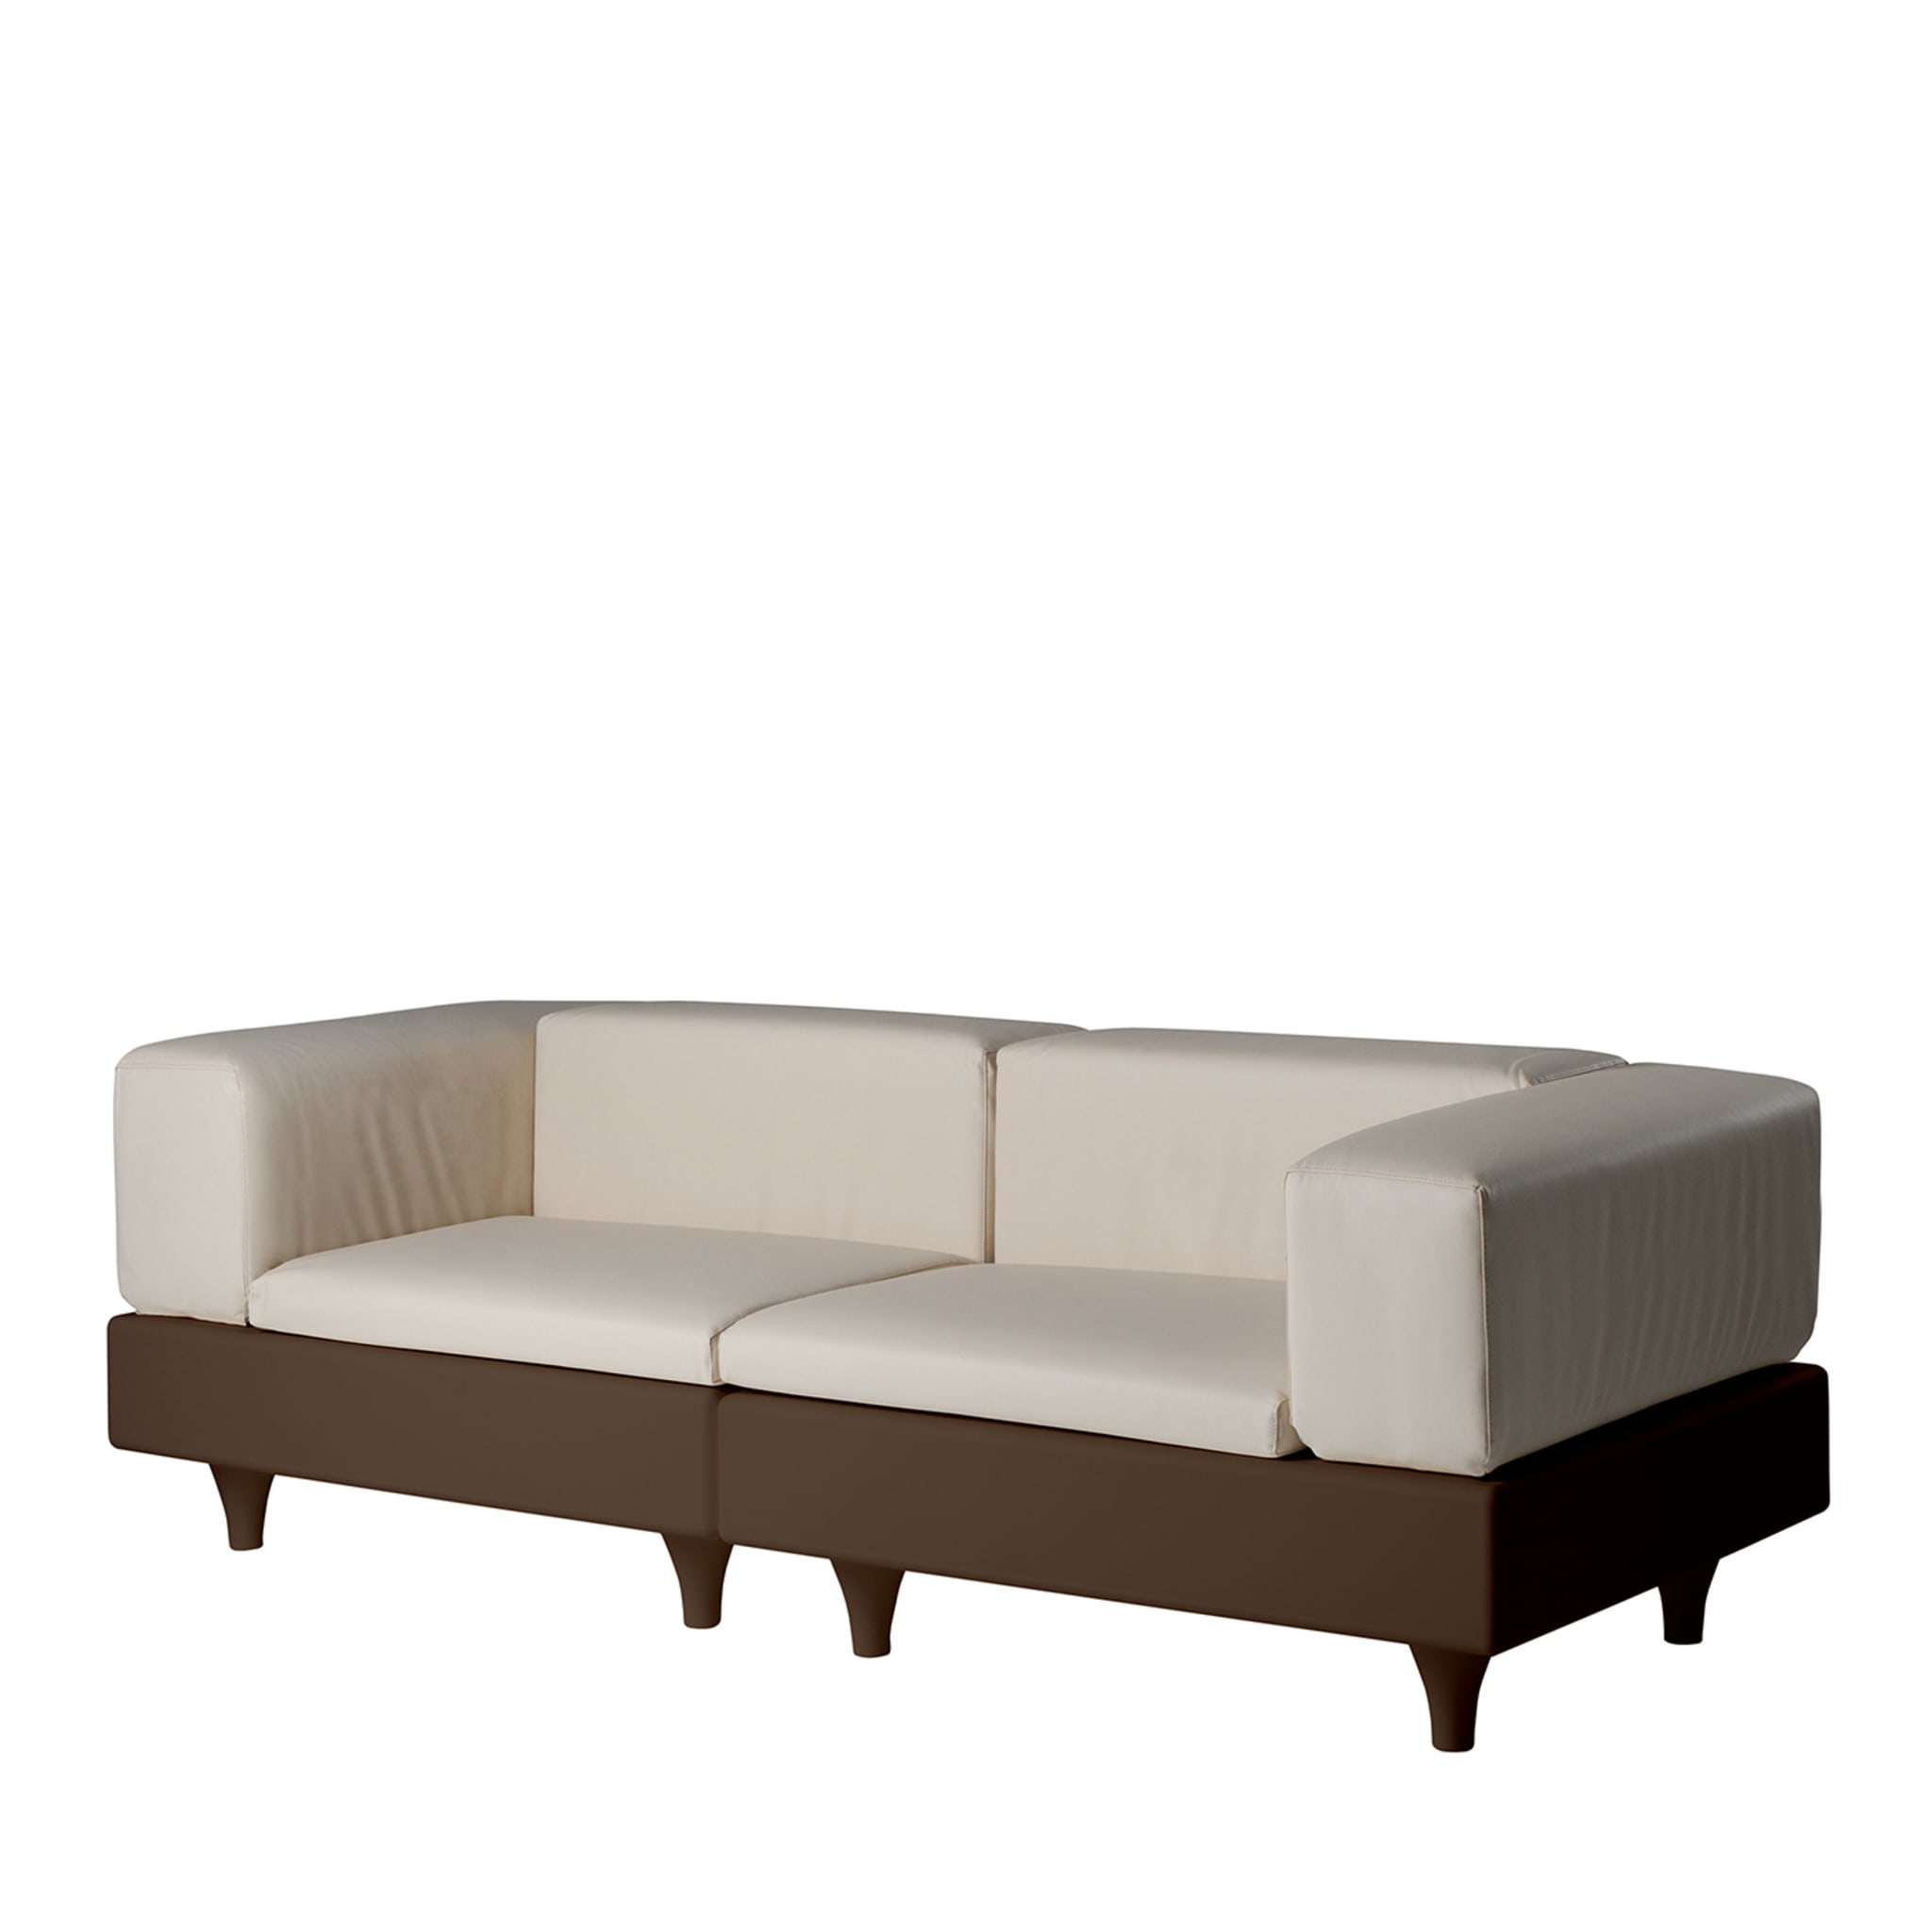 Happylife 2-Seater Brown and Beige Sofa - Main view